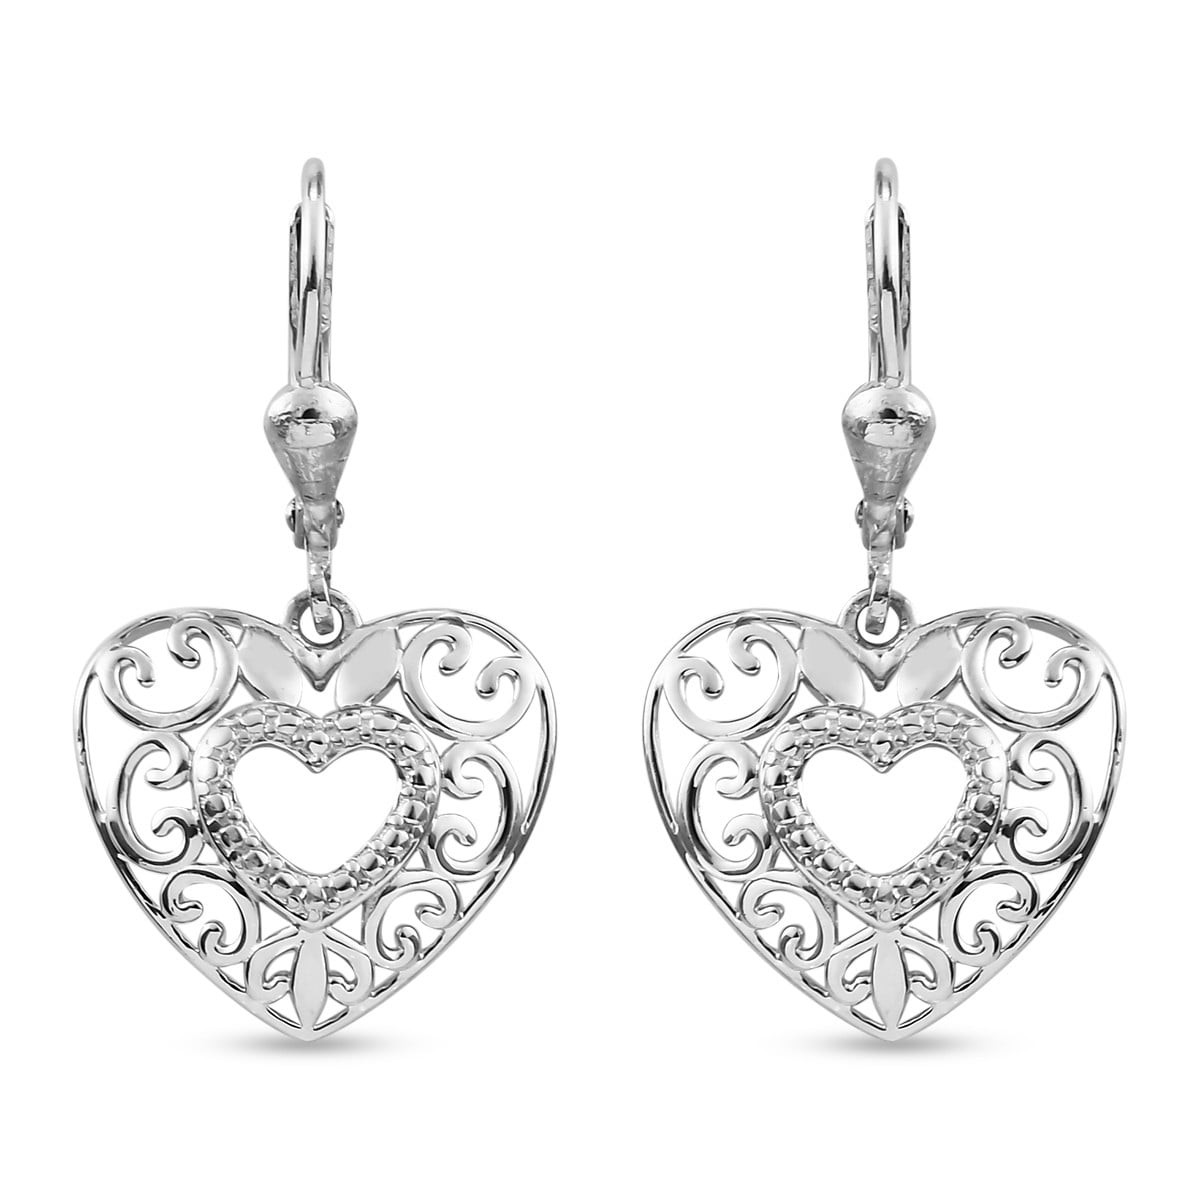 Sterling Silver Plated &18K Gold Plated Hollow Peach Heart Horse Head Charm Dangle Earring